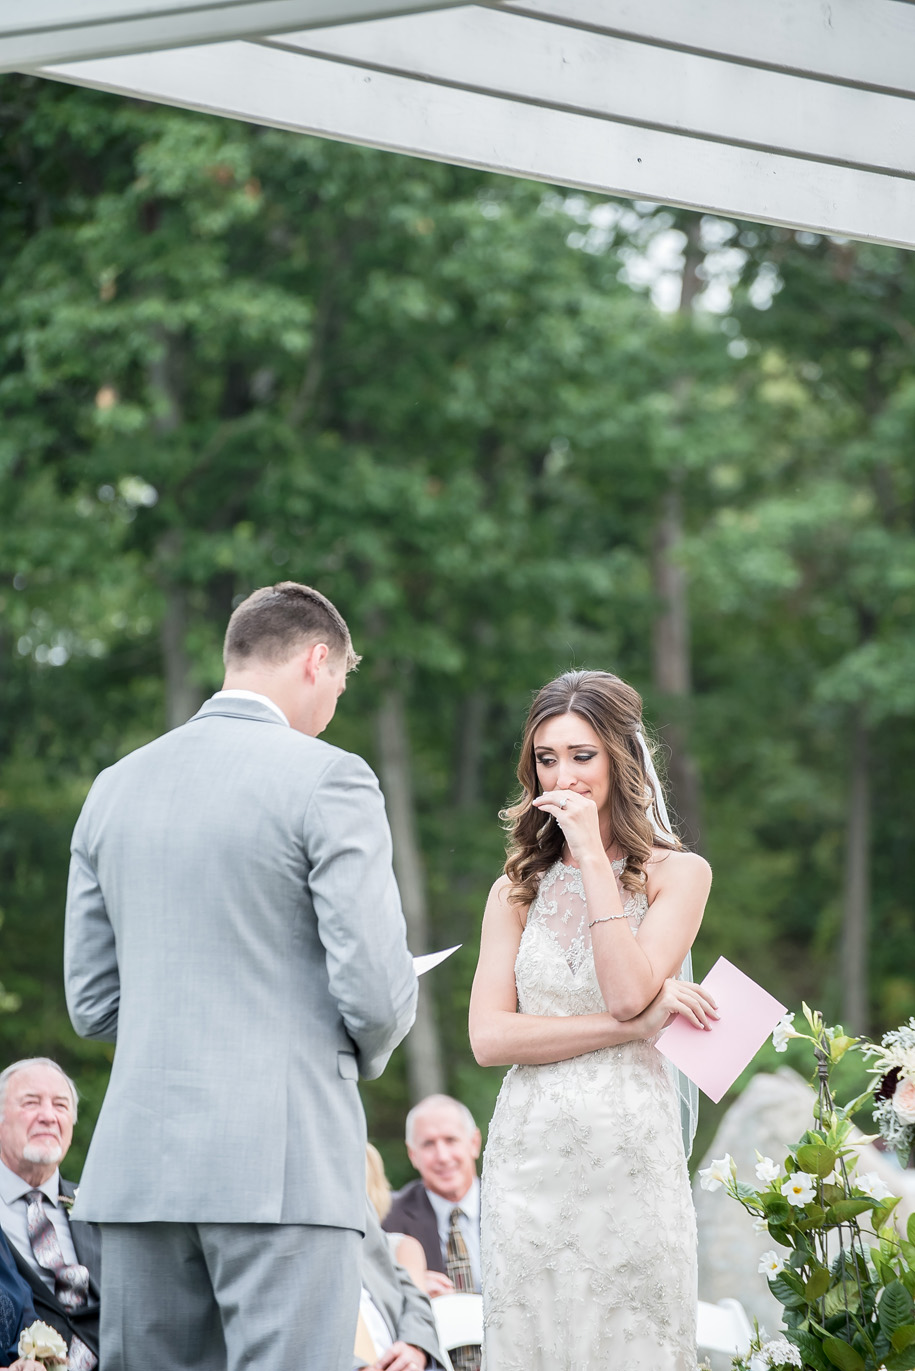 Sweet moment of a bride as her groom reads his vows l Rustic outdoor wedding ceremony l Pink and gray wedding